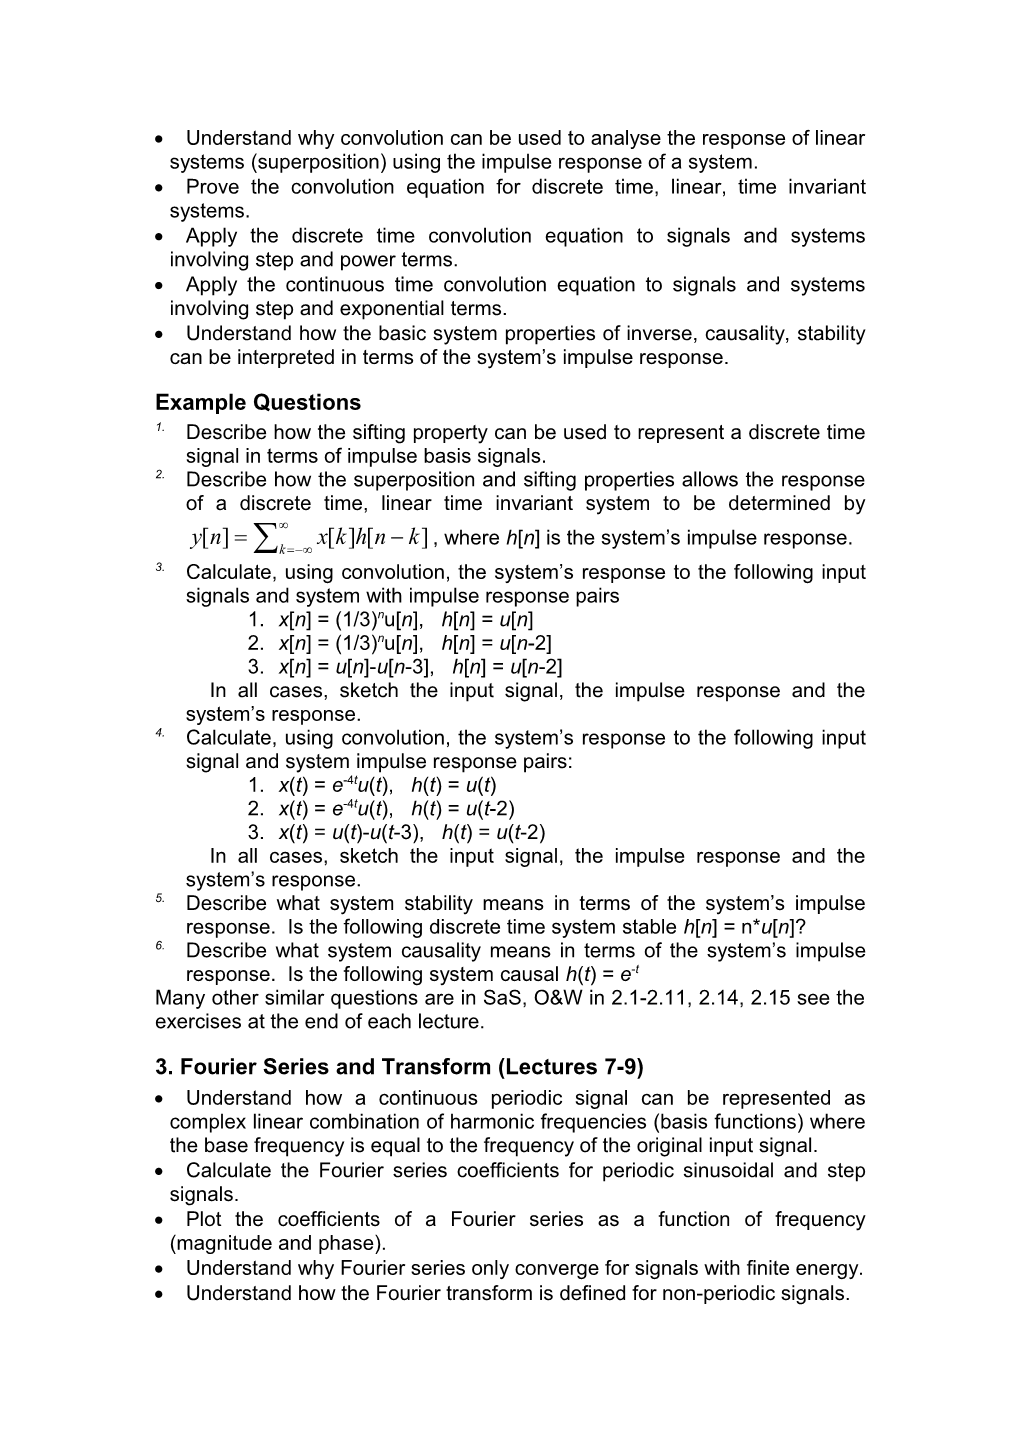 Signals and Systems Exam 2004-5